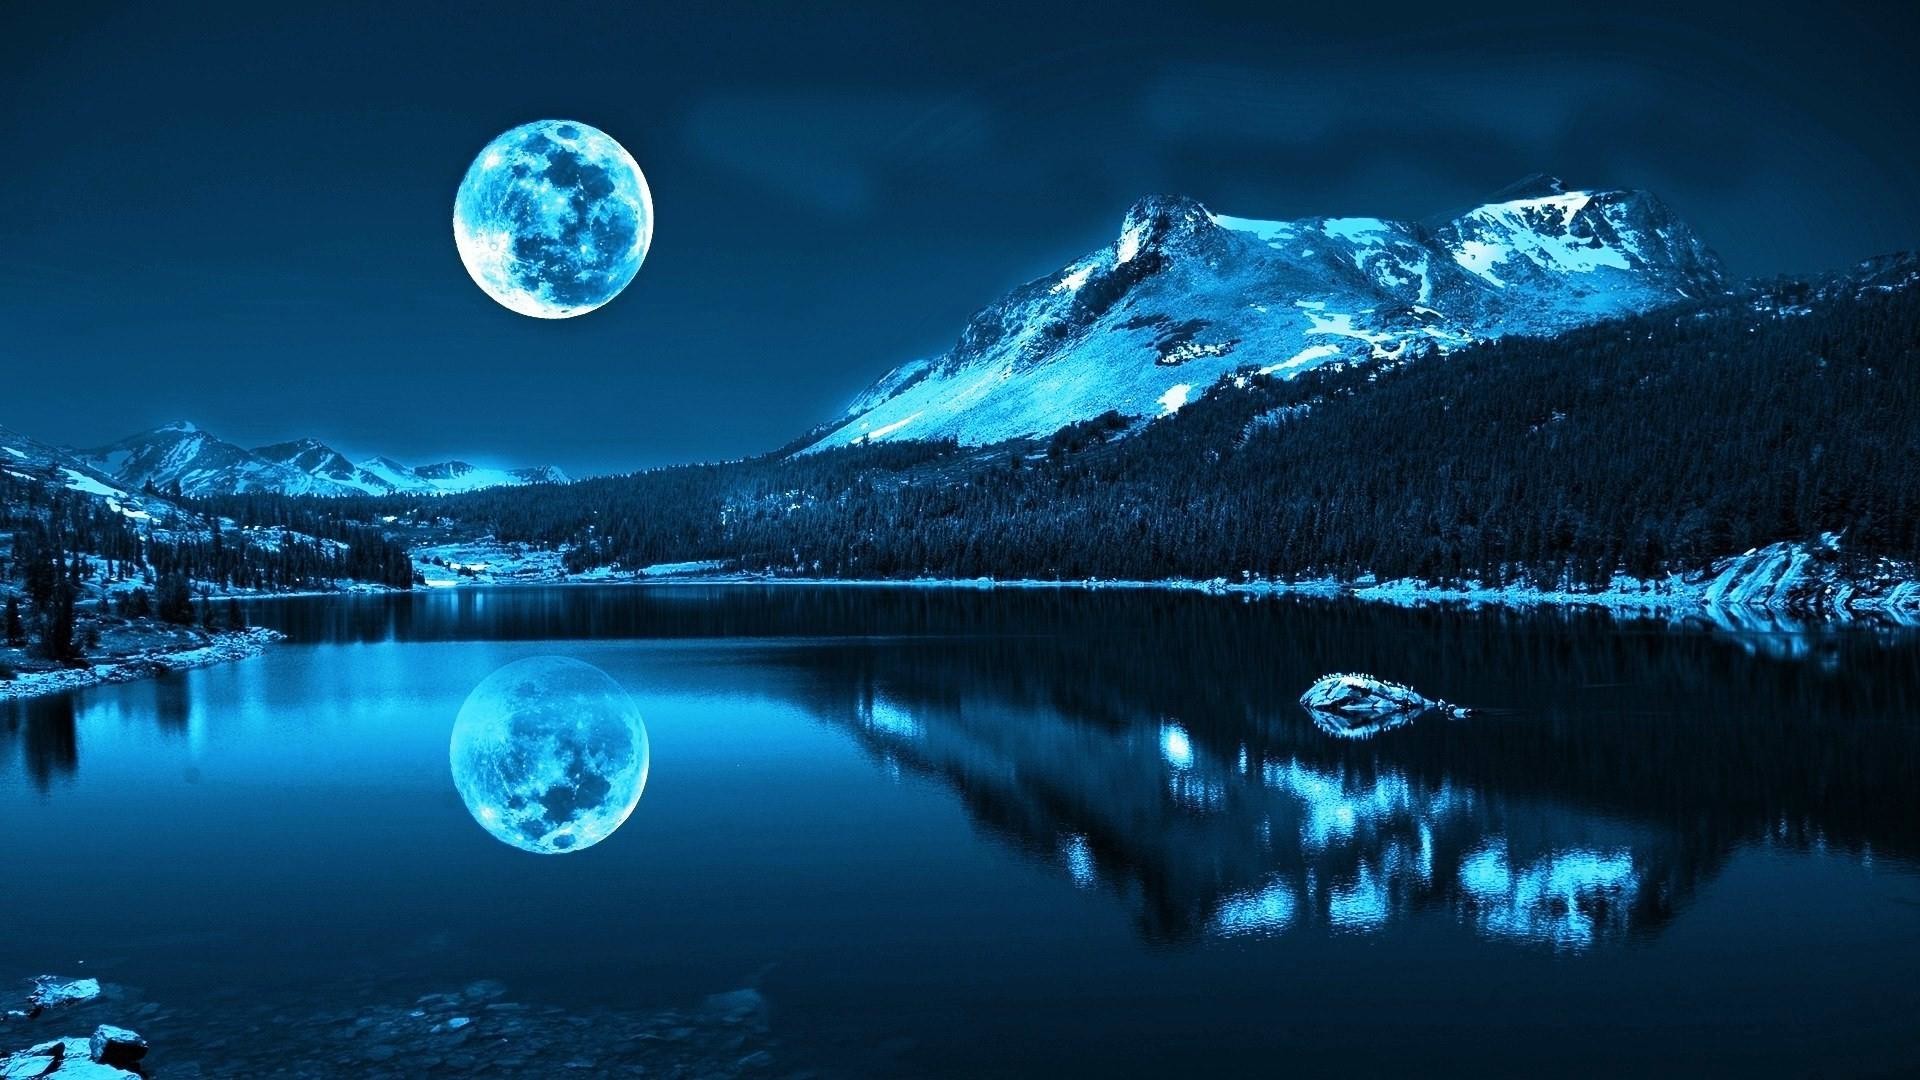 Mountain Moon Lake HD Wallpapers. Download Desktop Backgrounds, Photos,  Mobile Wallpapers in HD